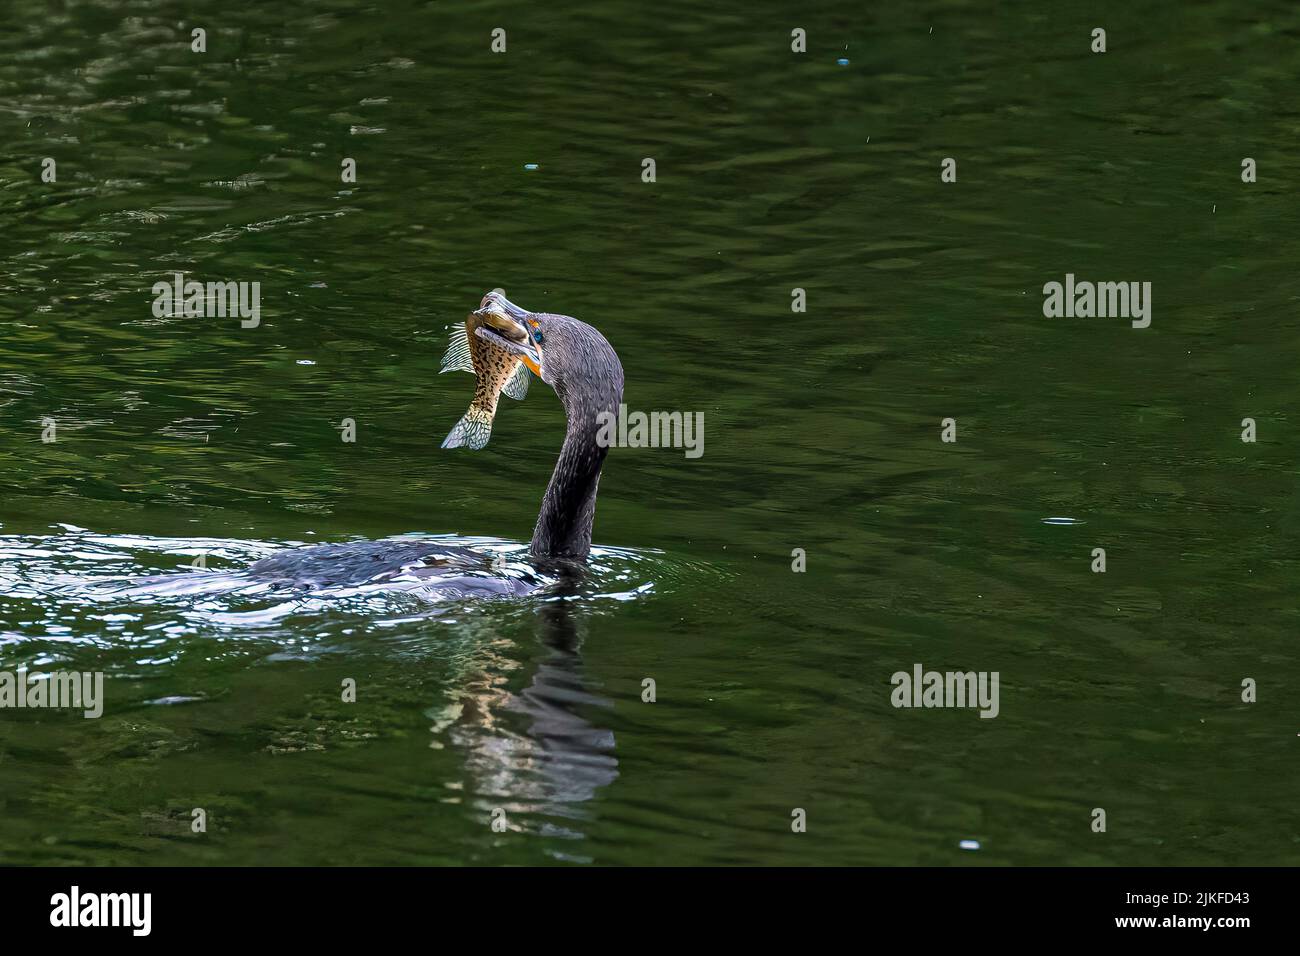 A closeup of a cormorant catching a fish with its beak in a lake Stock Photo